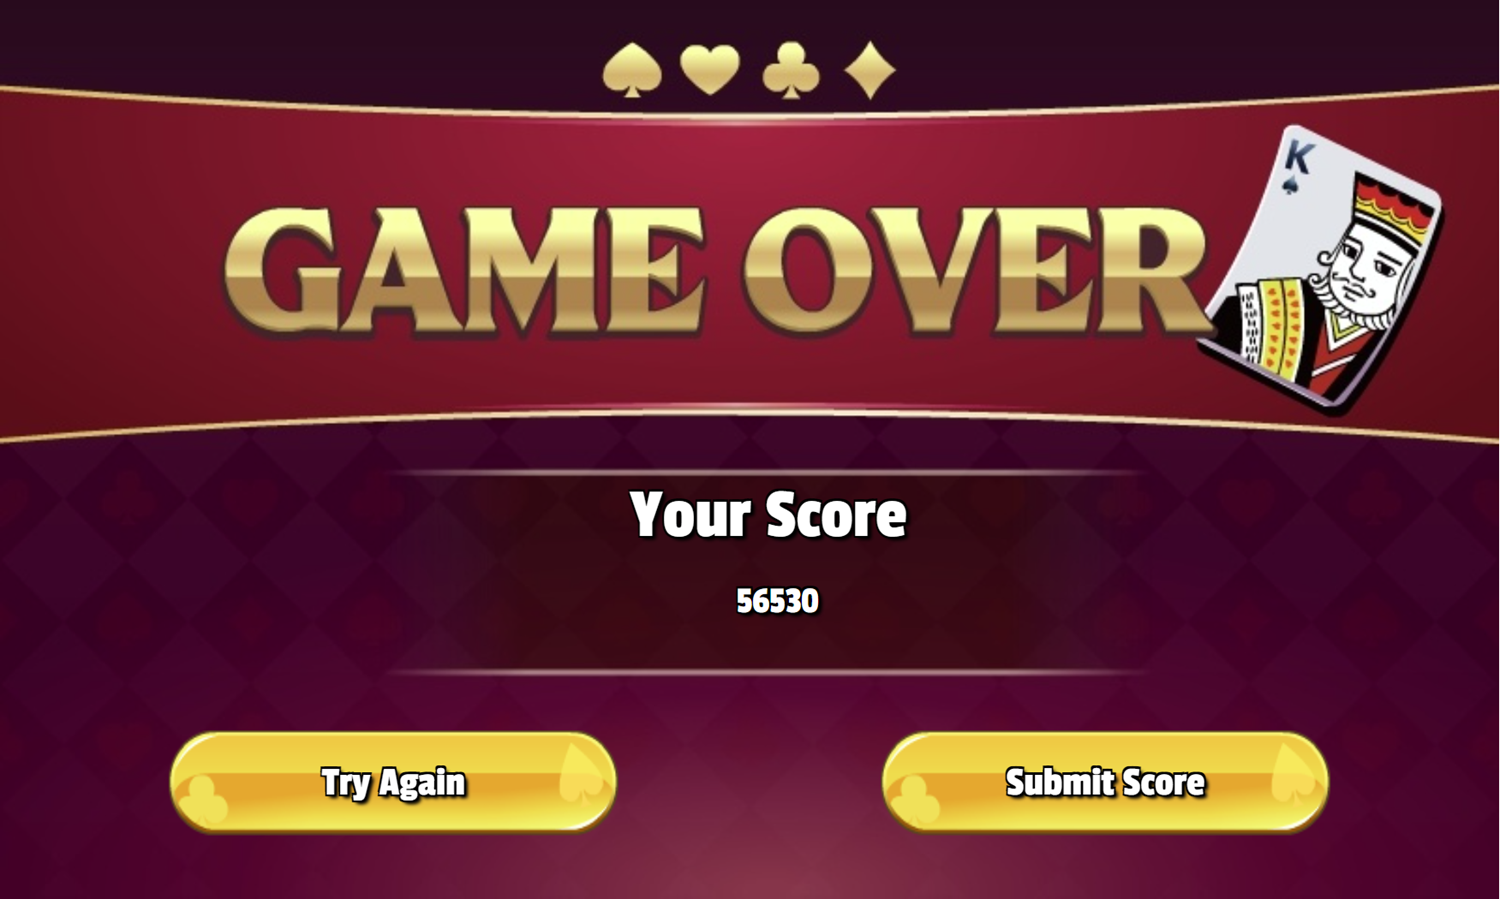 Tower Solitaire Game Over Screen Screenshot.